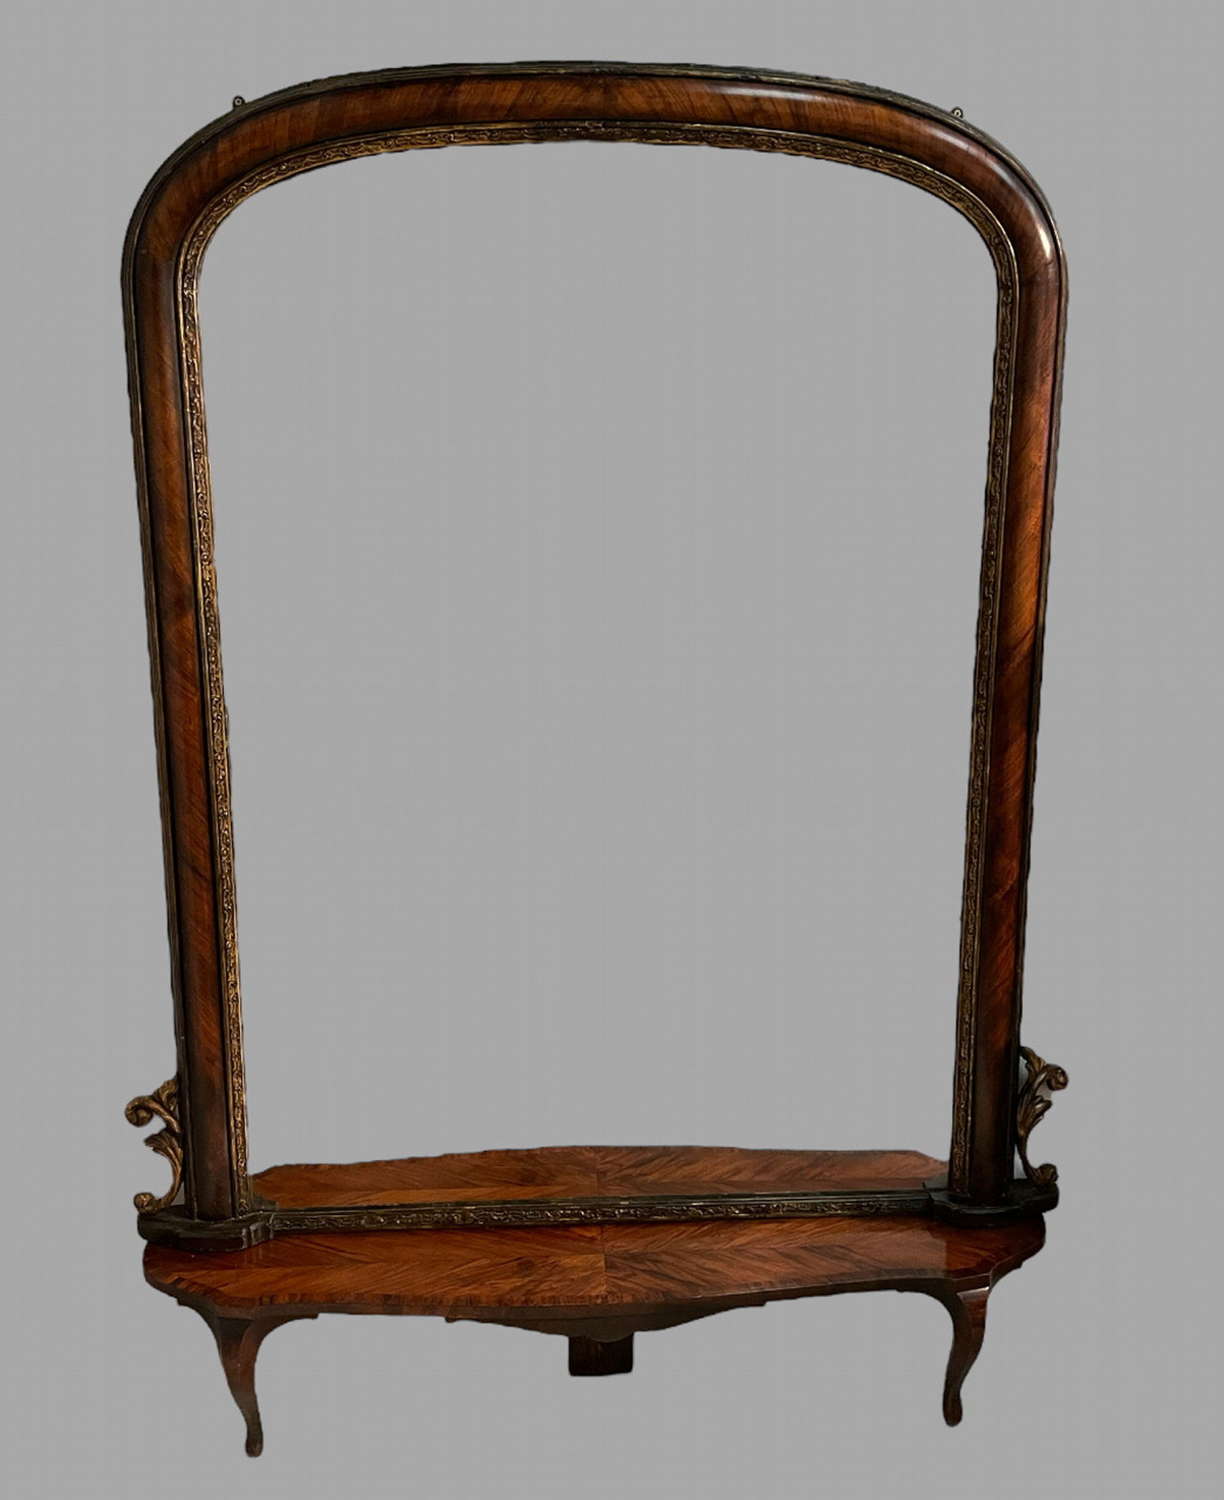 A Large Walnut Mirror on Stand